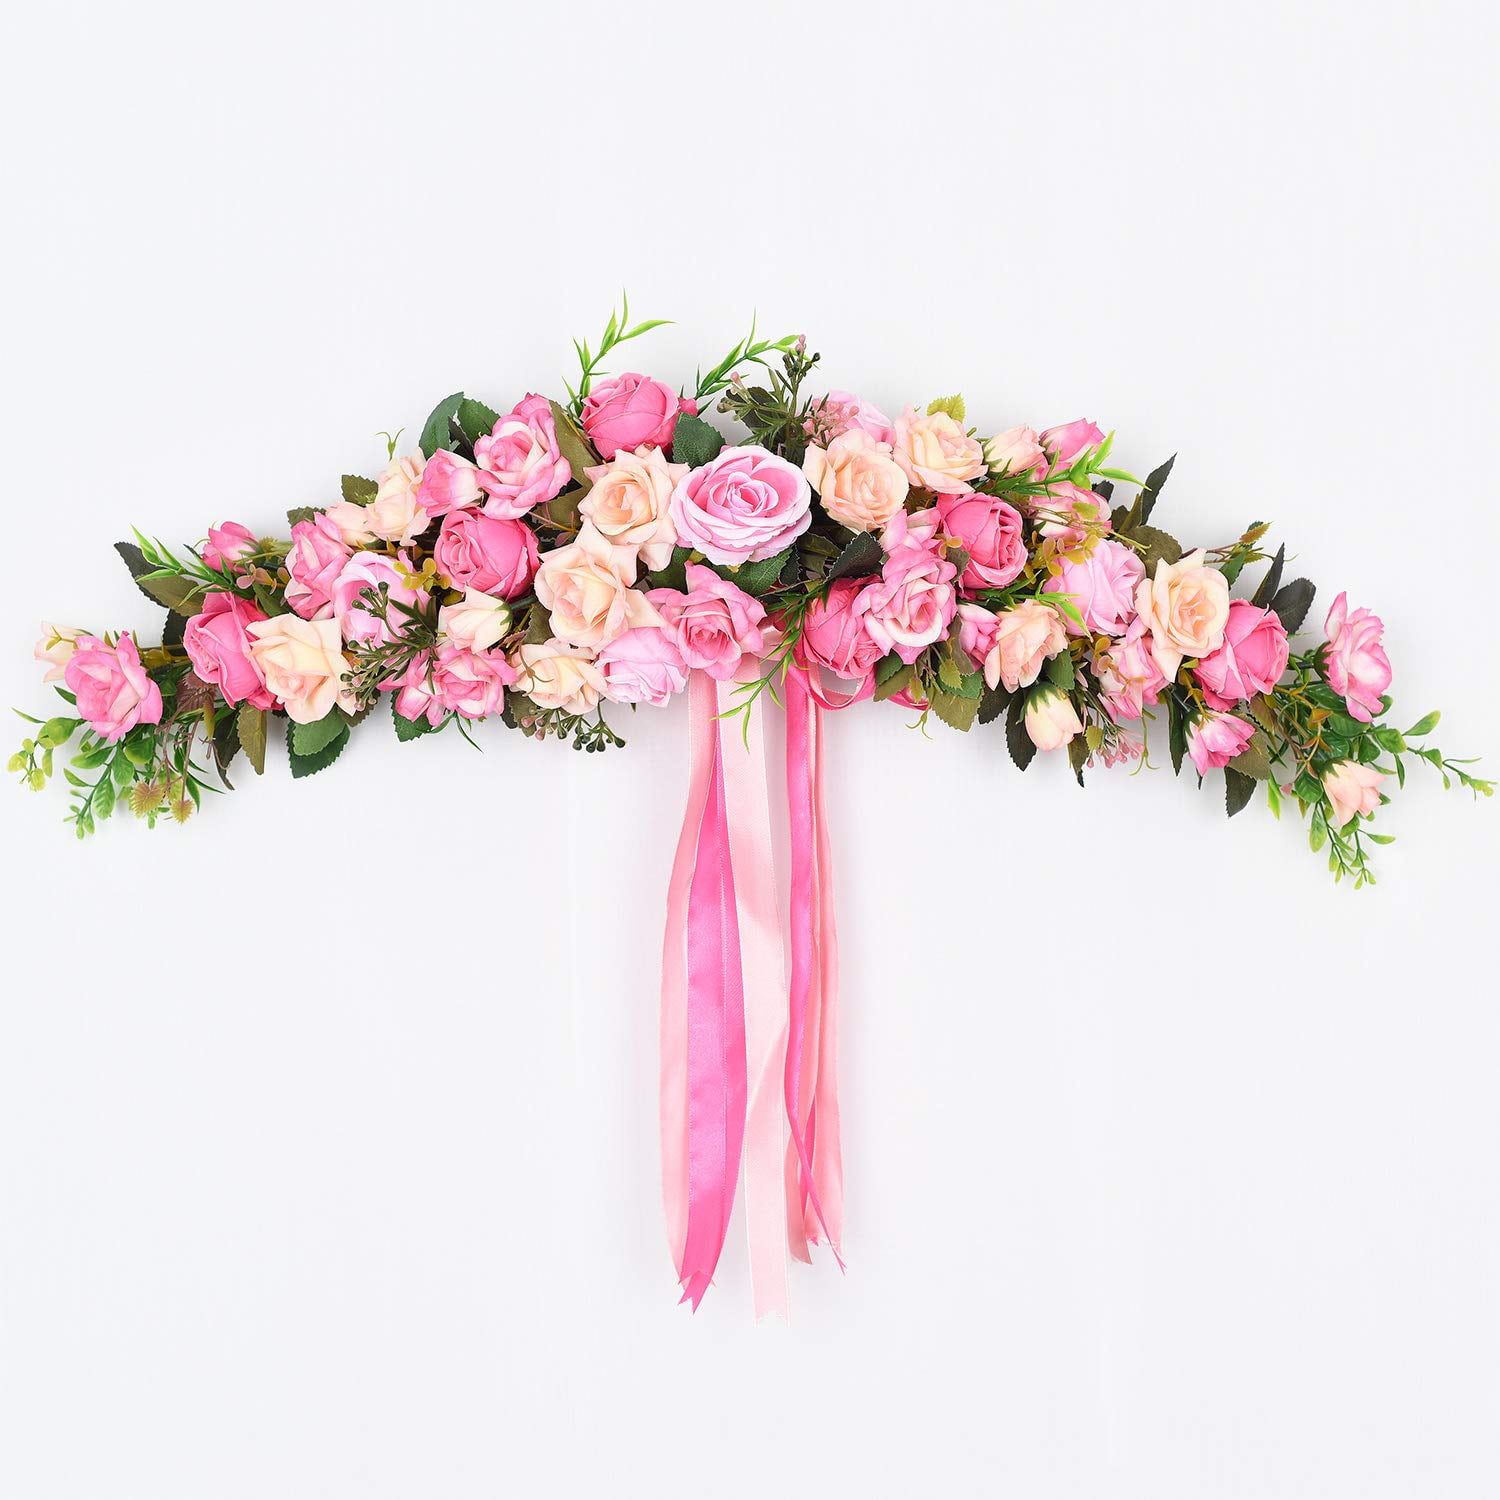 YQing 48cm Sunflower Artificial Flower Swag Floral Swags with Eucalyptus Green Leaves Wreath for Front Door Mirror Wall Wedding Arch Home Decoration